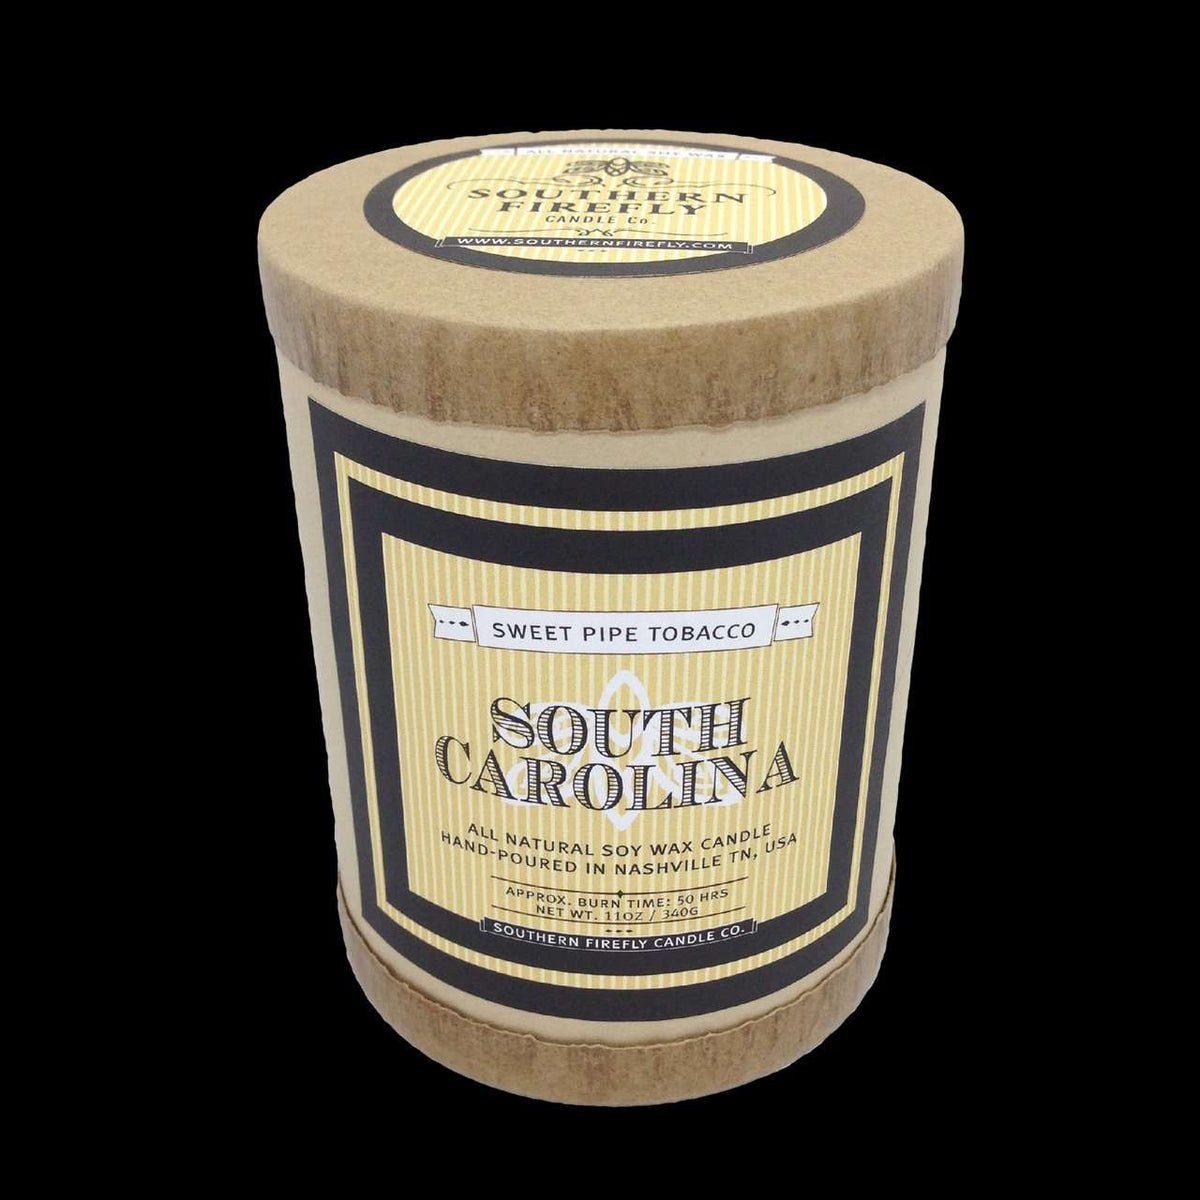 South Carolina Destination Series Soy Candle in Sweet Pipe Tobacco Scent by Southern Firefly Candle Co. - Country Club Prep